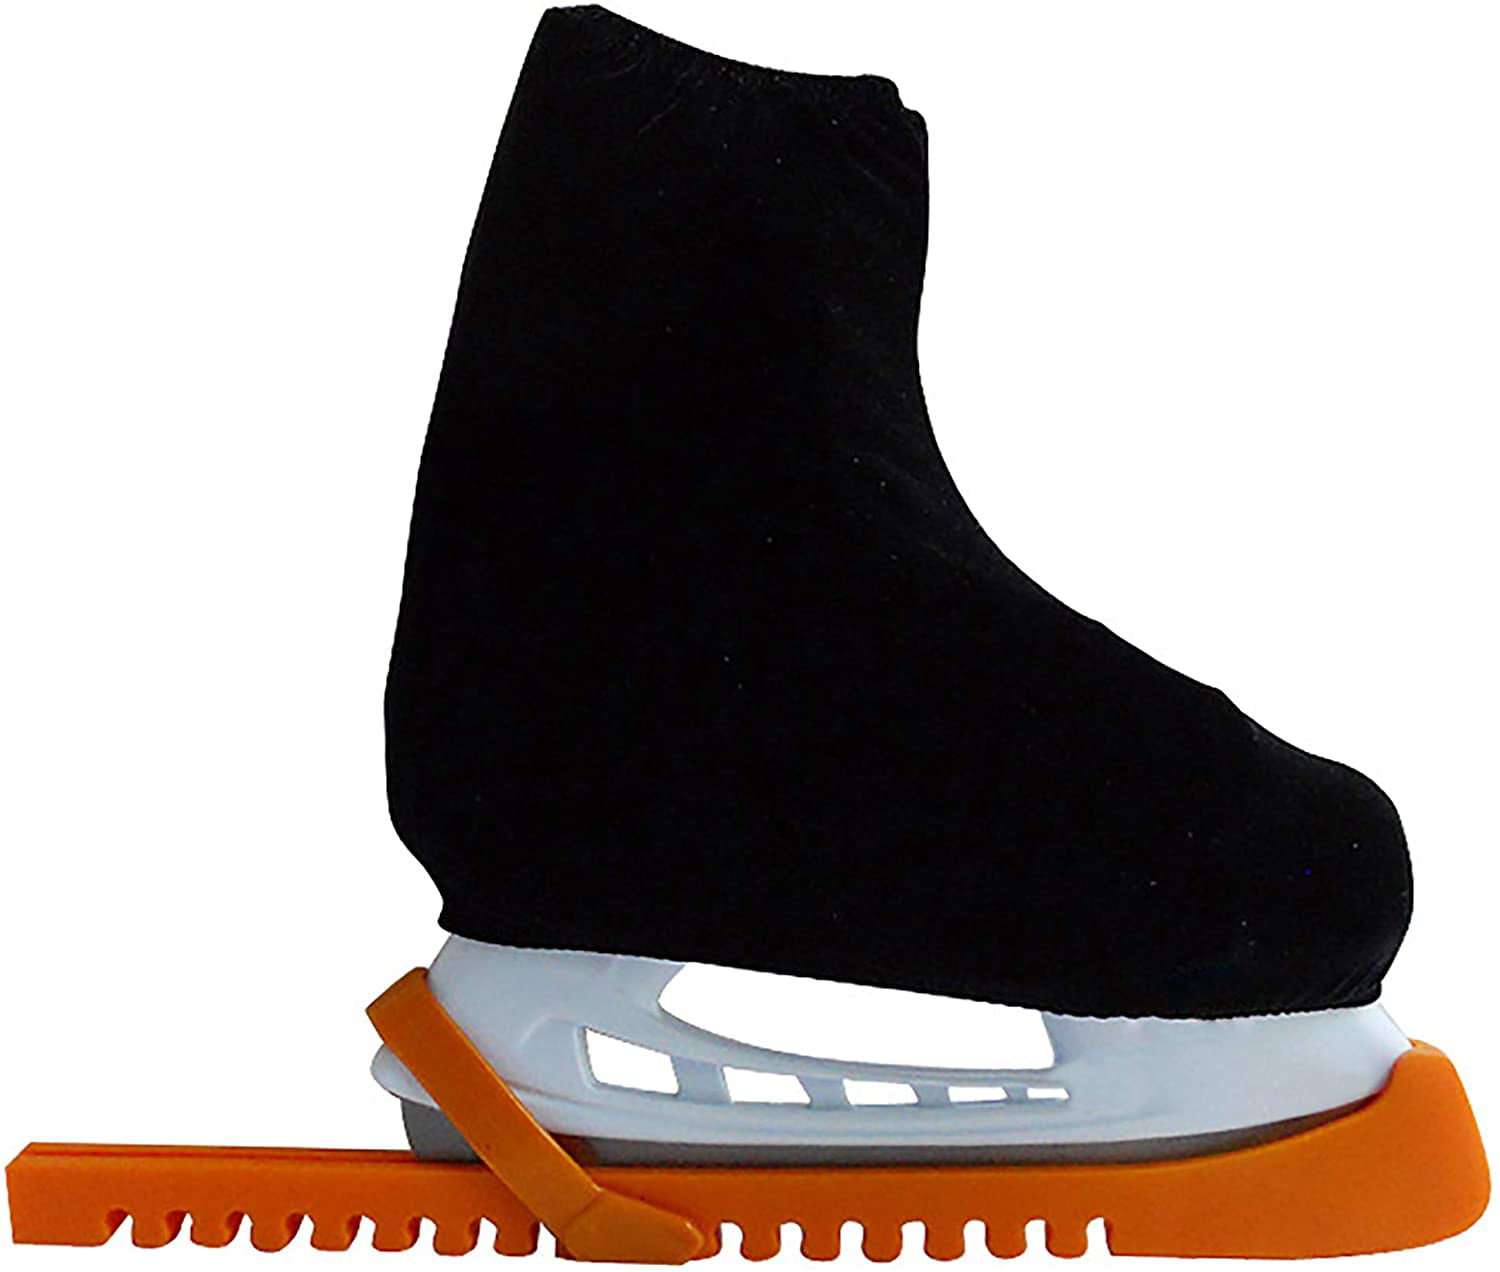 Details about   Safety Ice Hockey Figure Skate Walking Blade Guards Protector Covers Adjustable 